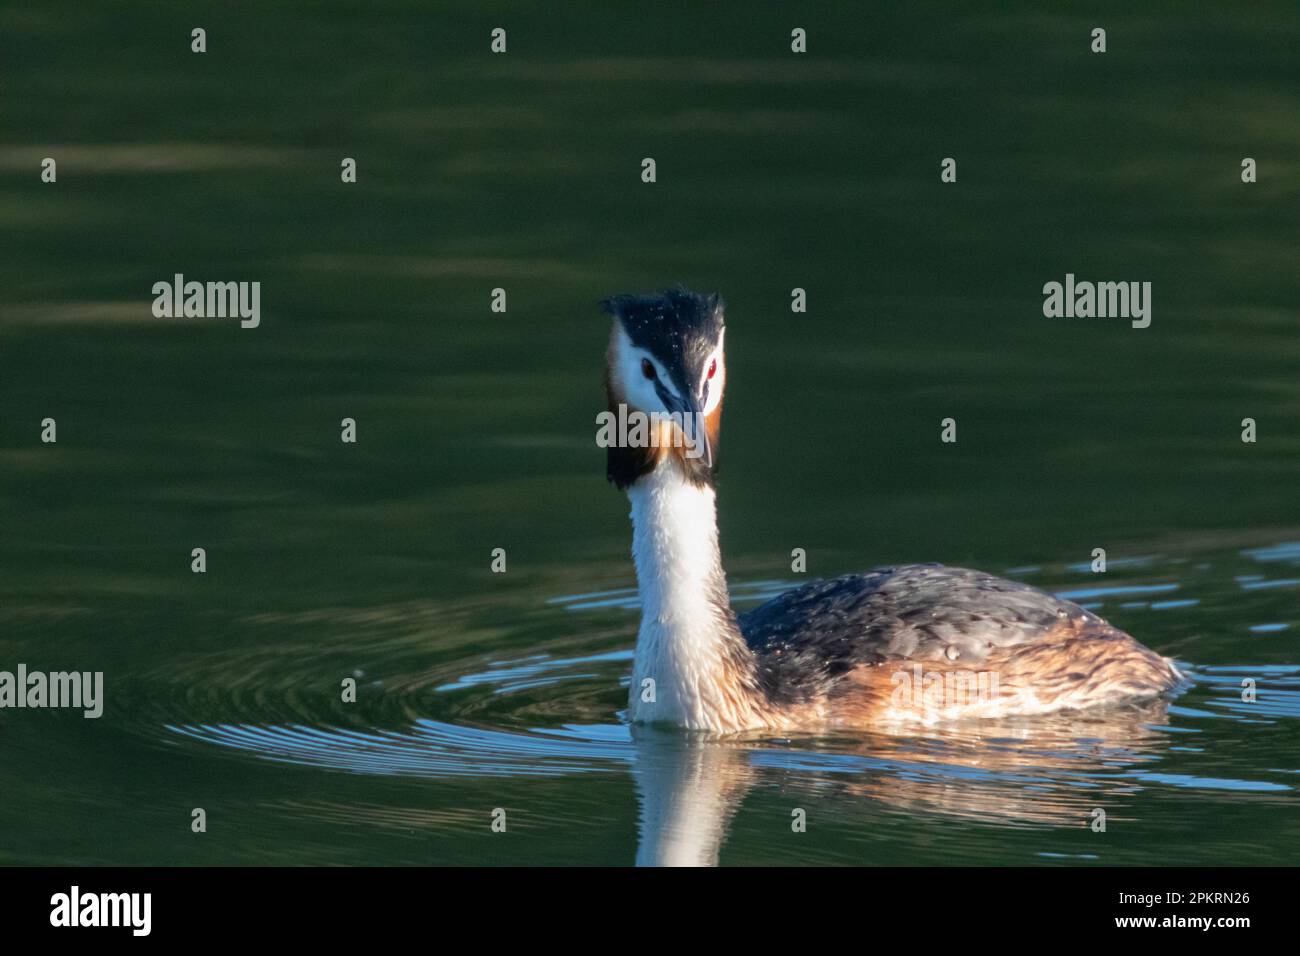 Great crested grebe, Podiceps cristatus swimming solitary Stock Photo